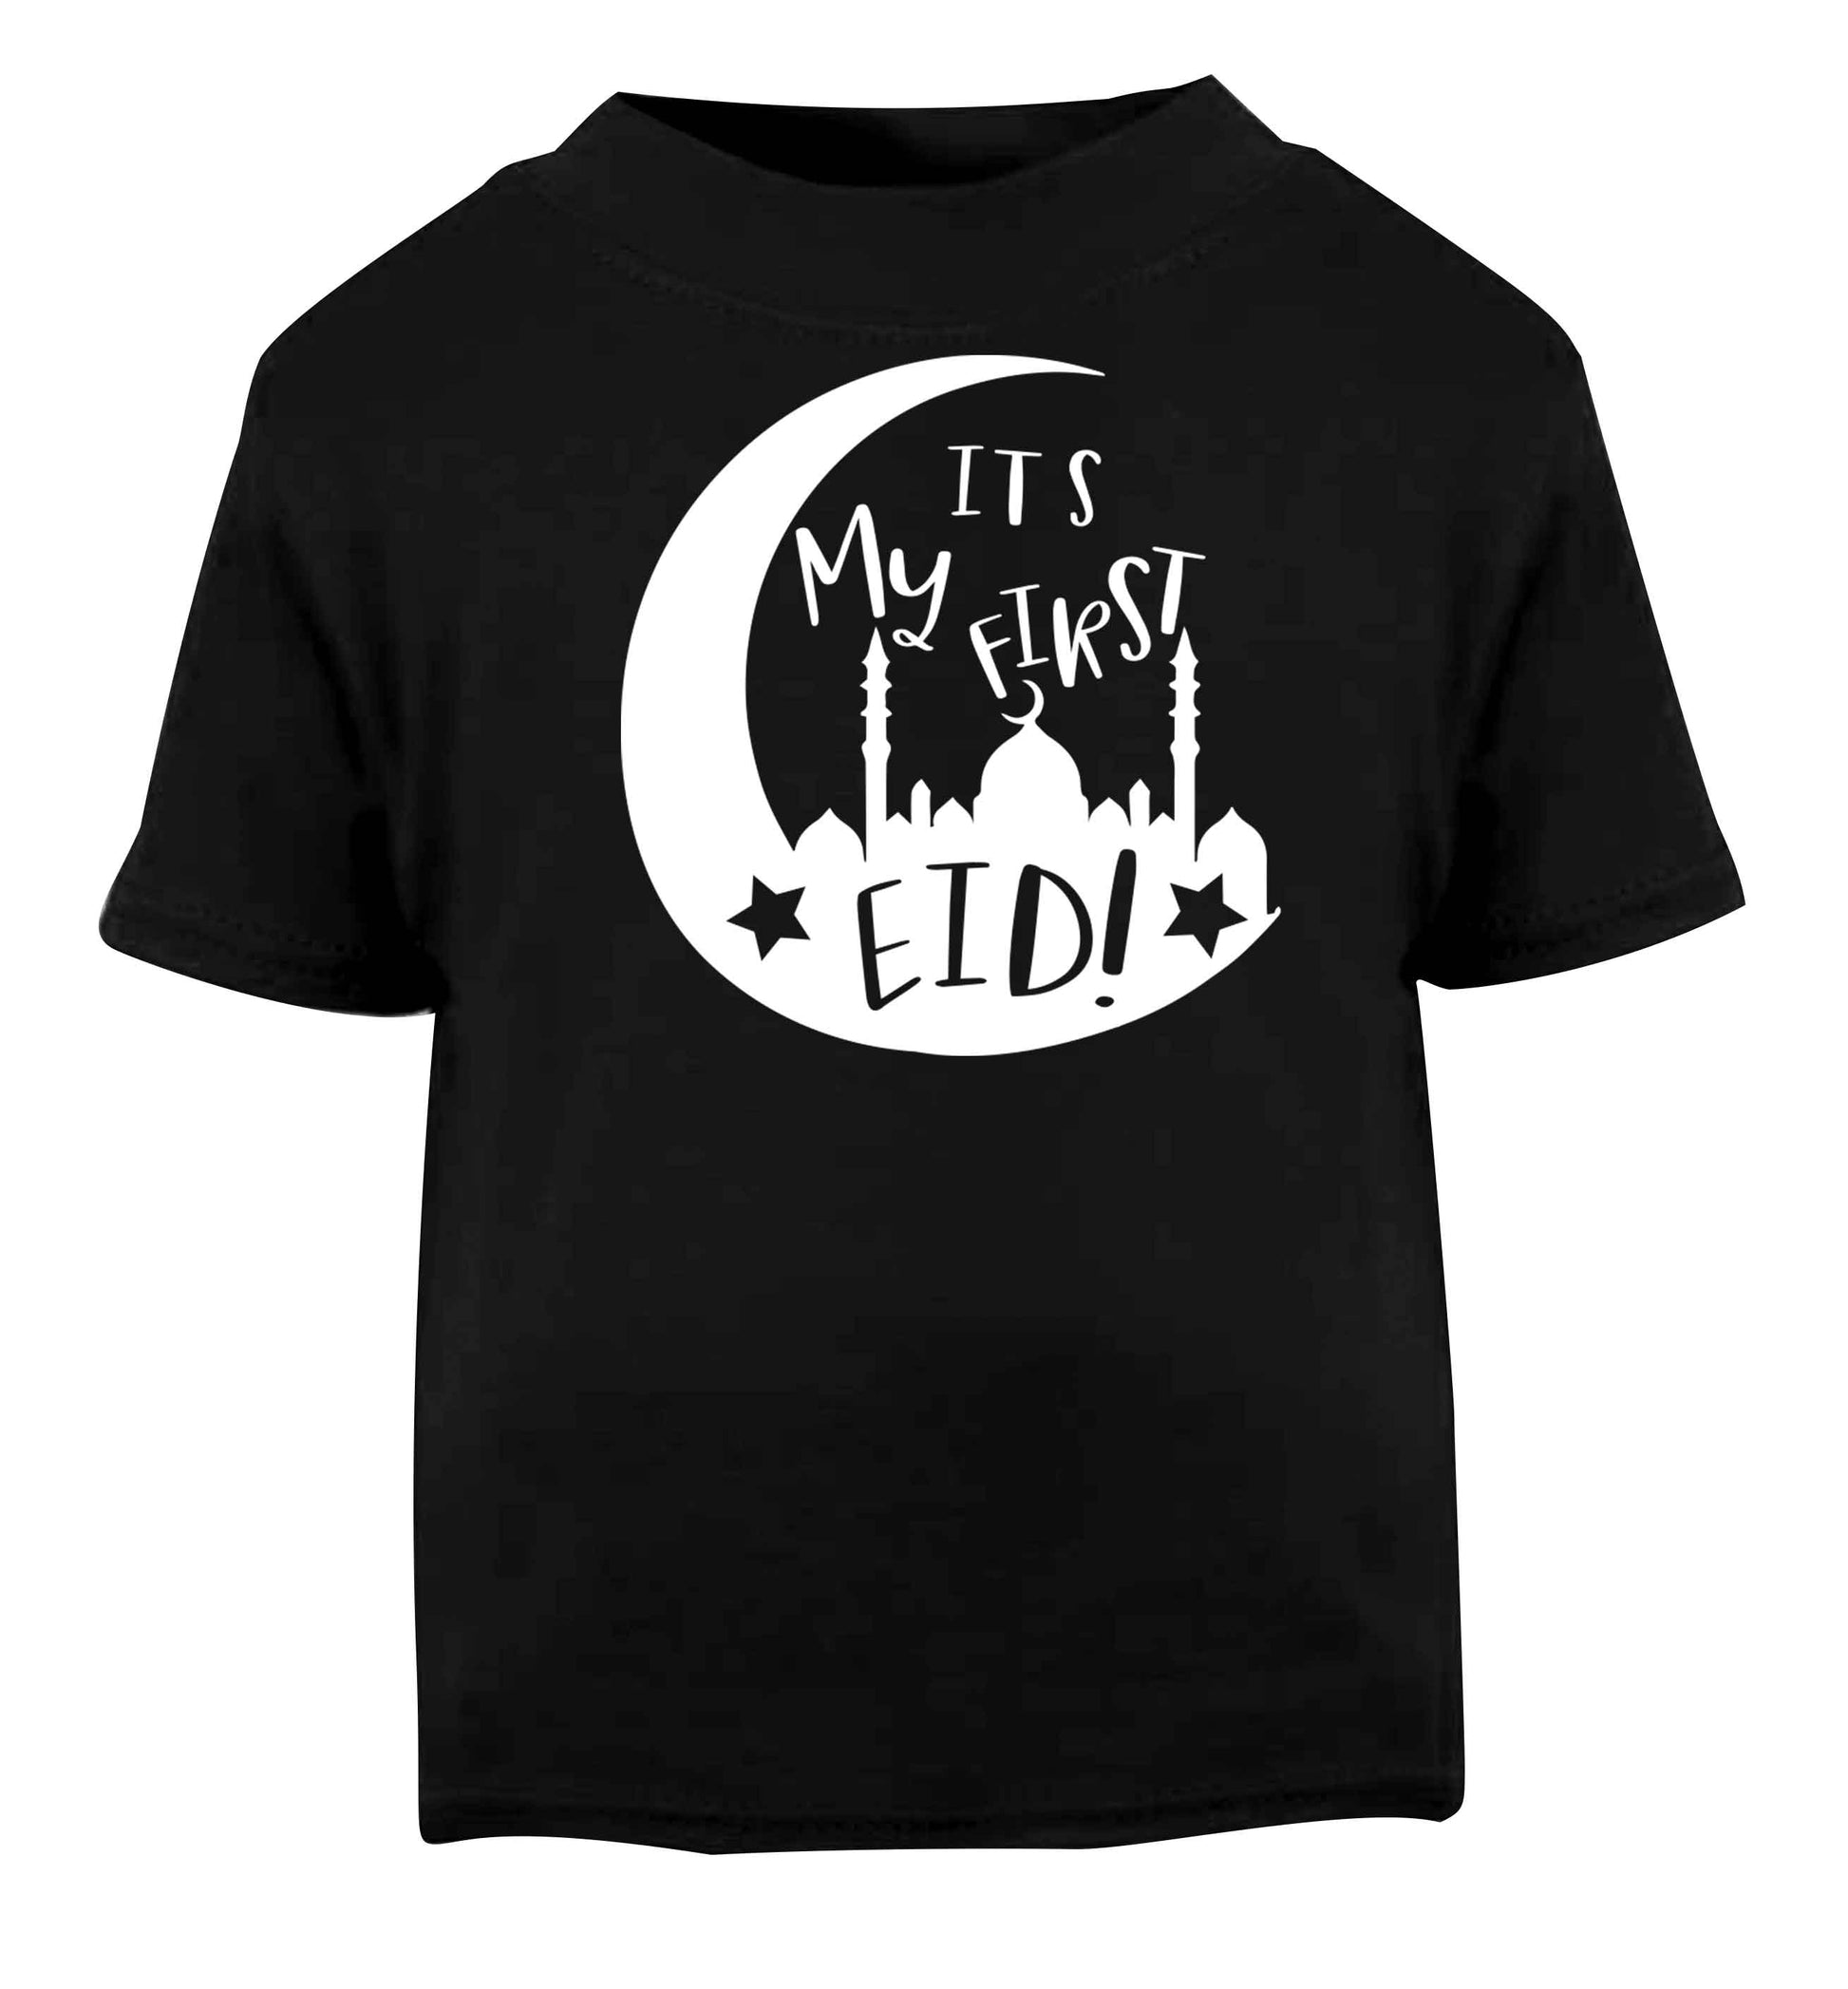 It's my first Eid moon Black baby toddler Tshirt 2 years